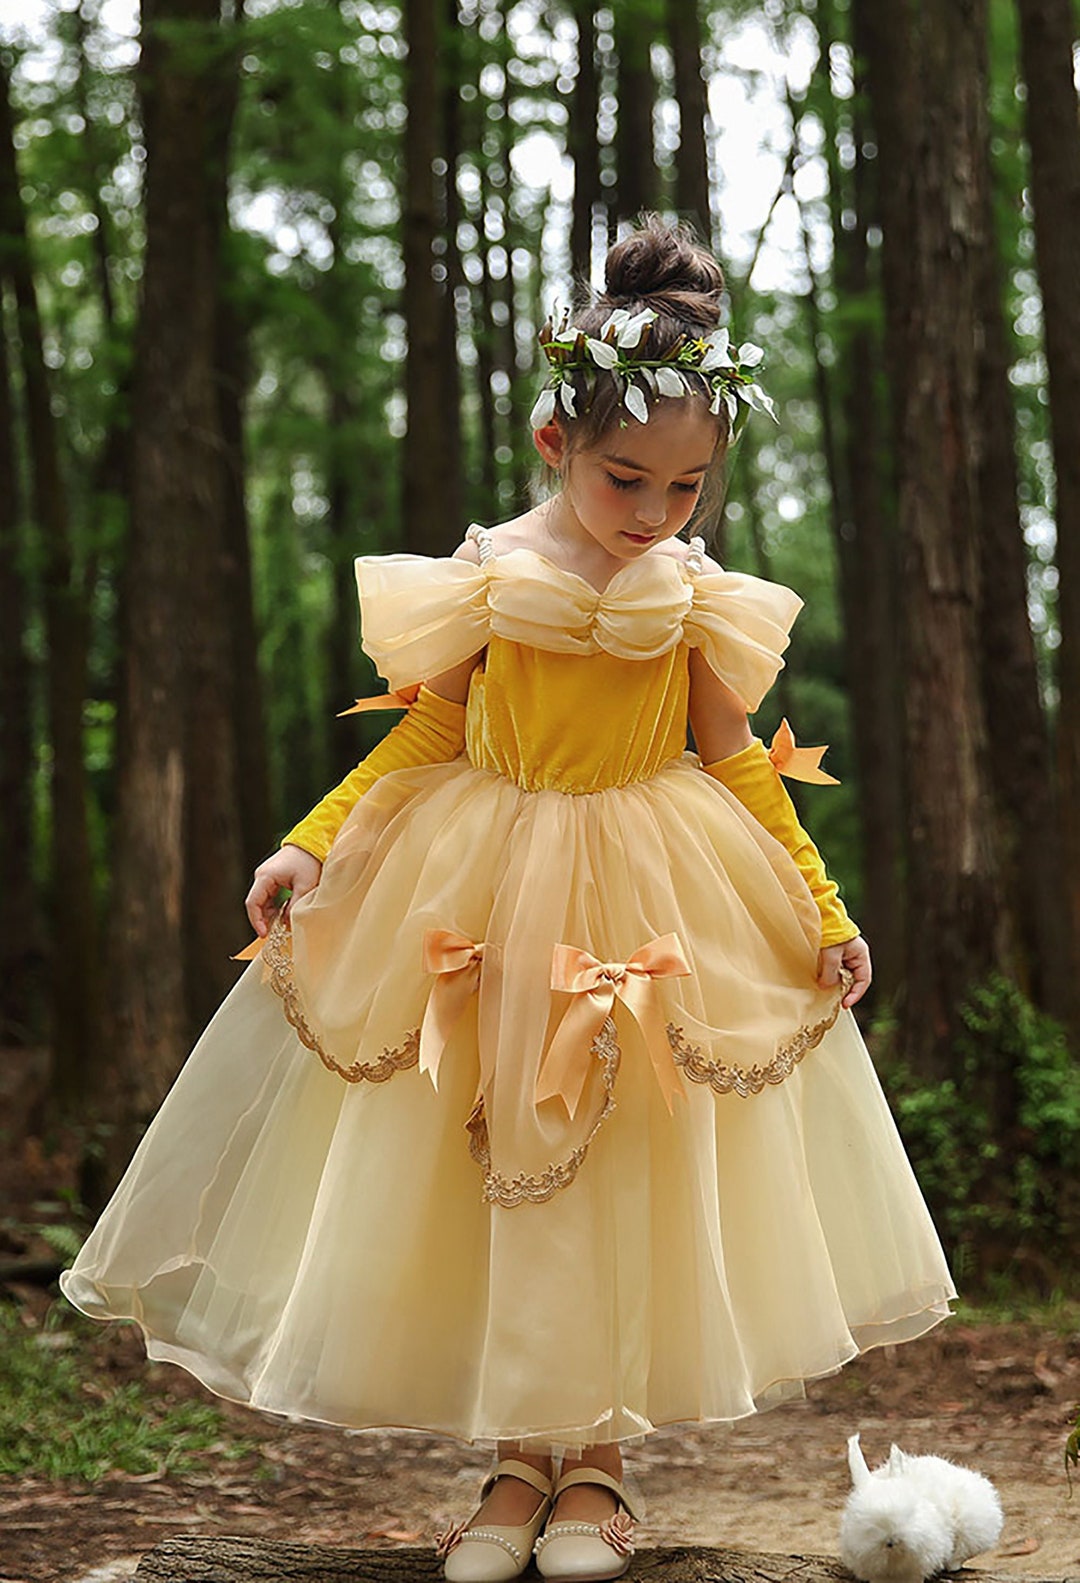 Belle Dress Belle Costume Disney Princess Beauty And The | thepadoctor.com